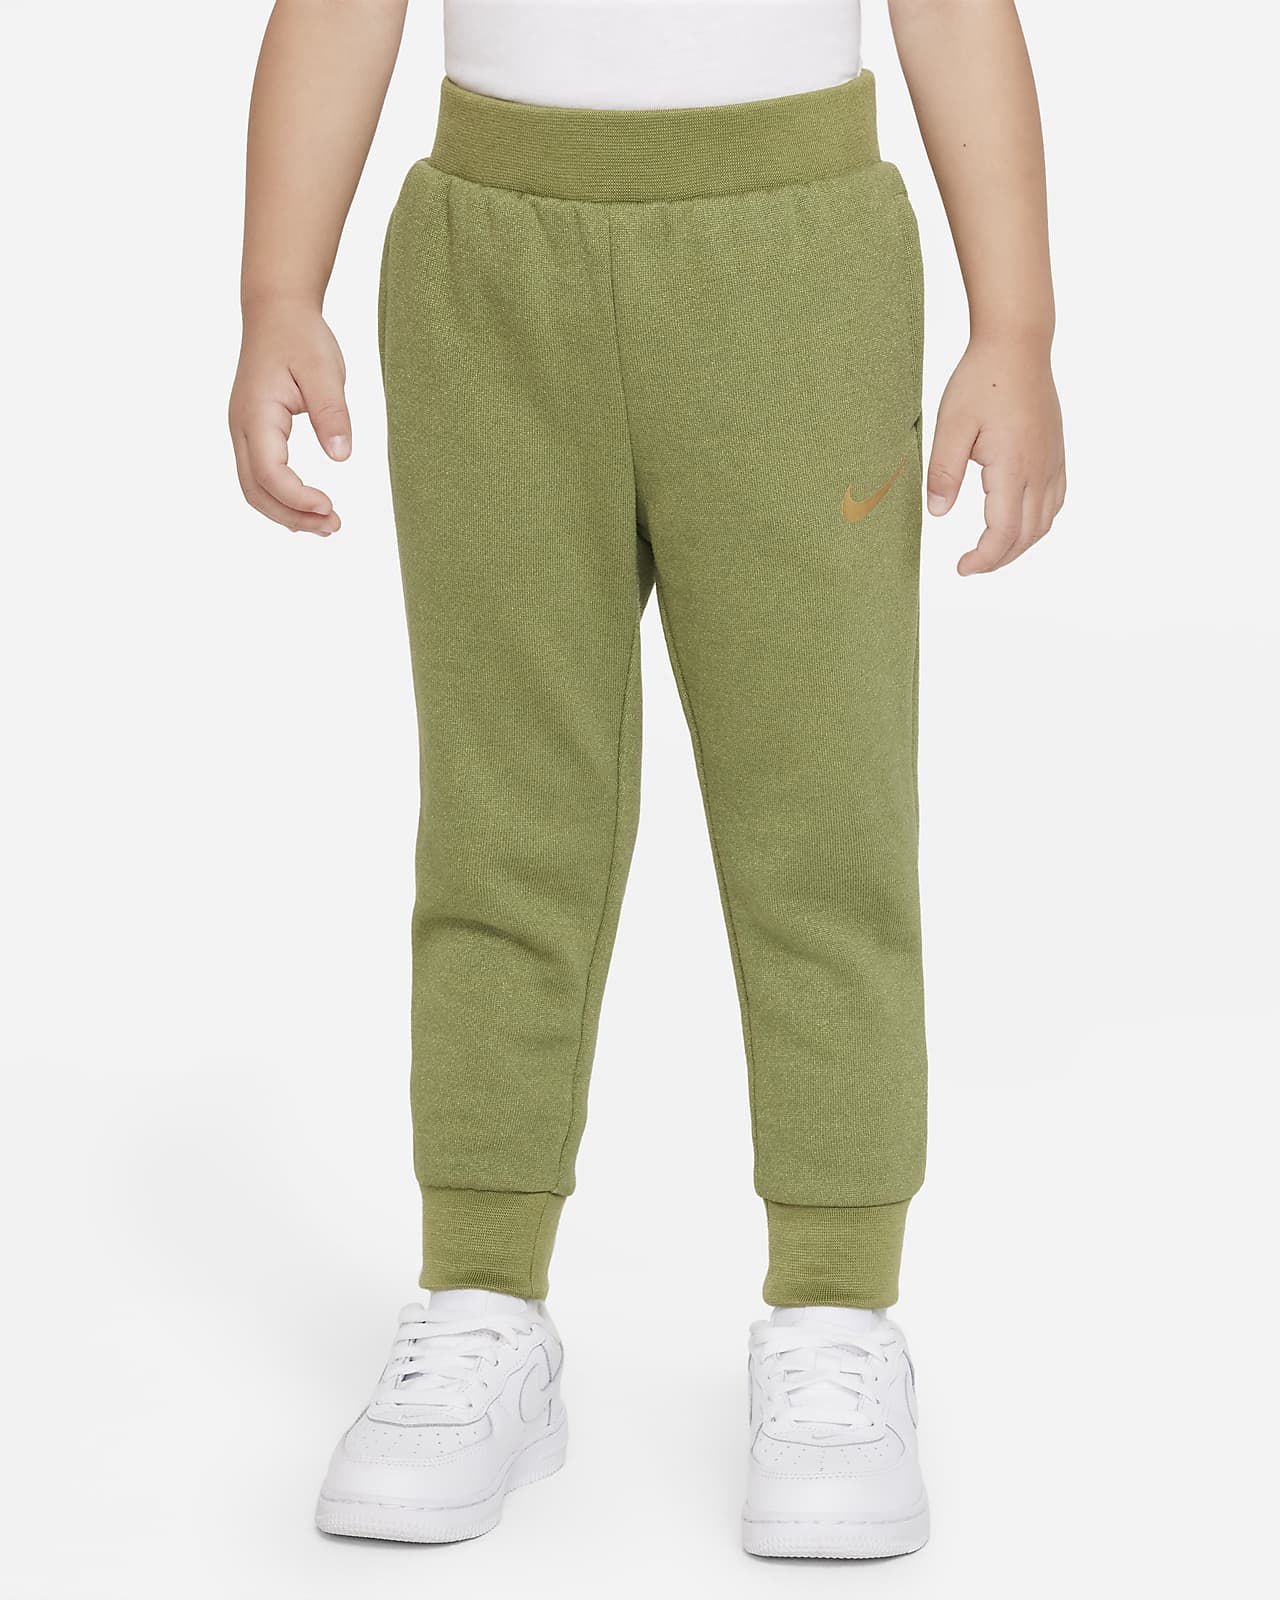 Nike Sportswear Essentials Women's Woven High Rise OH Pants Green  FB8284-386| Buy Online at FOOTDISTRICT